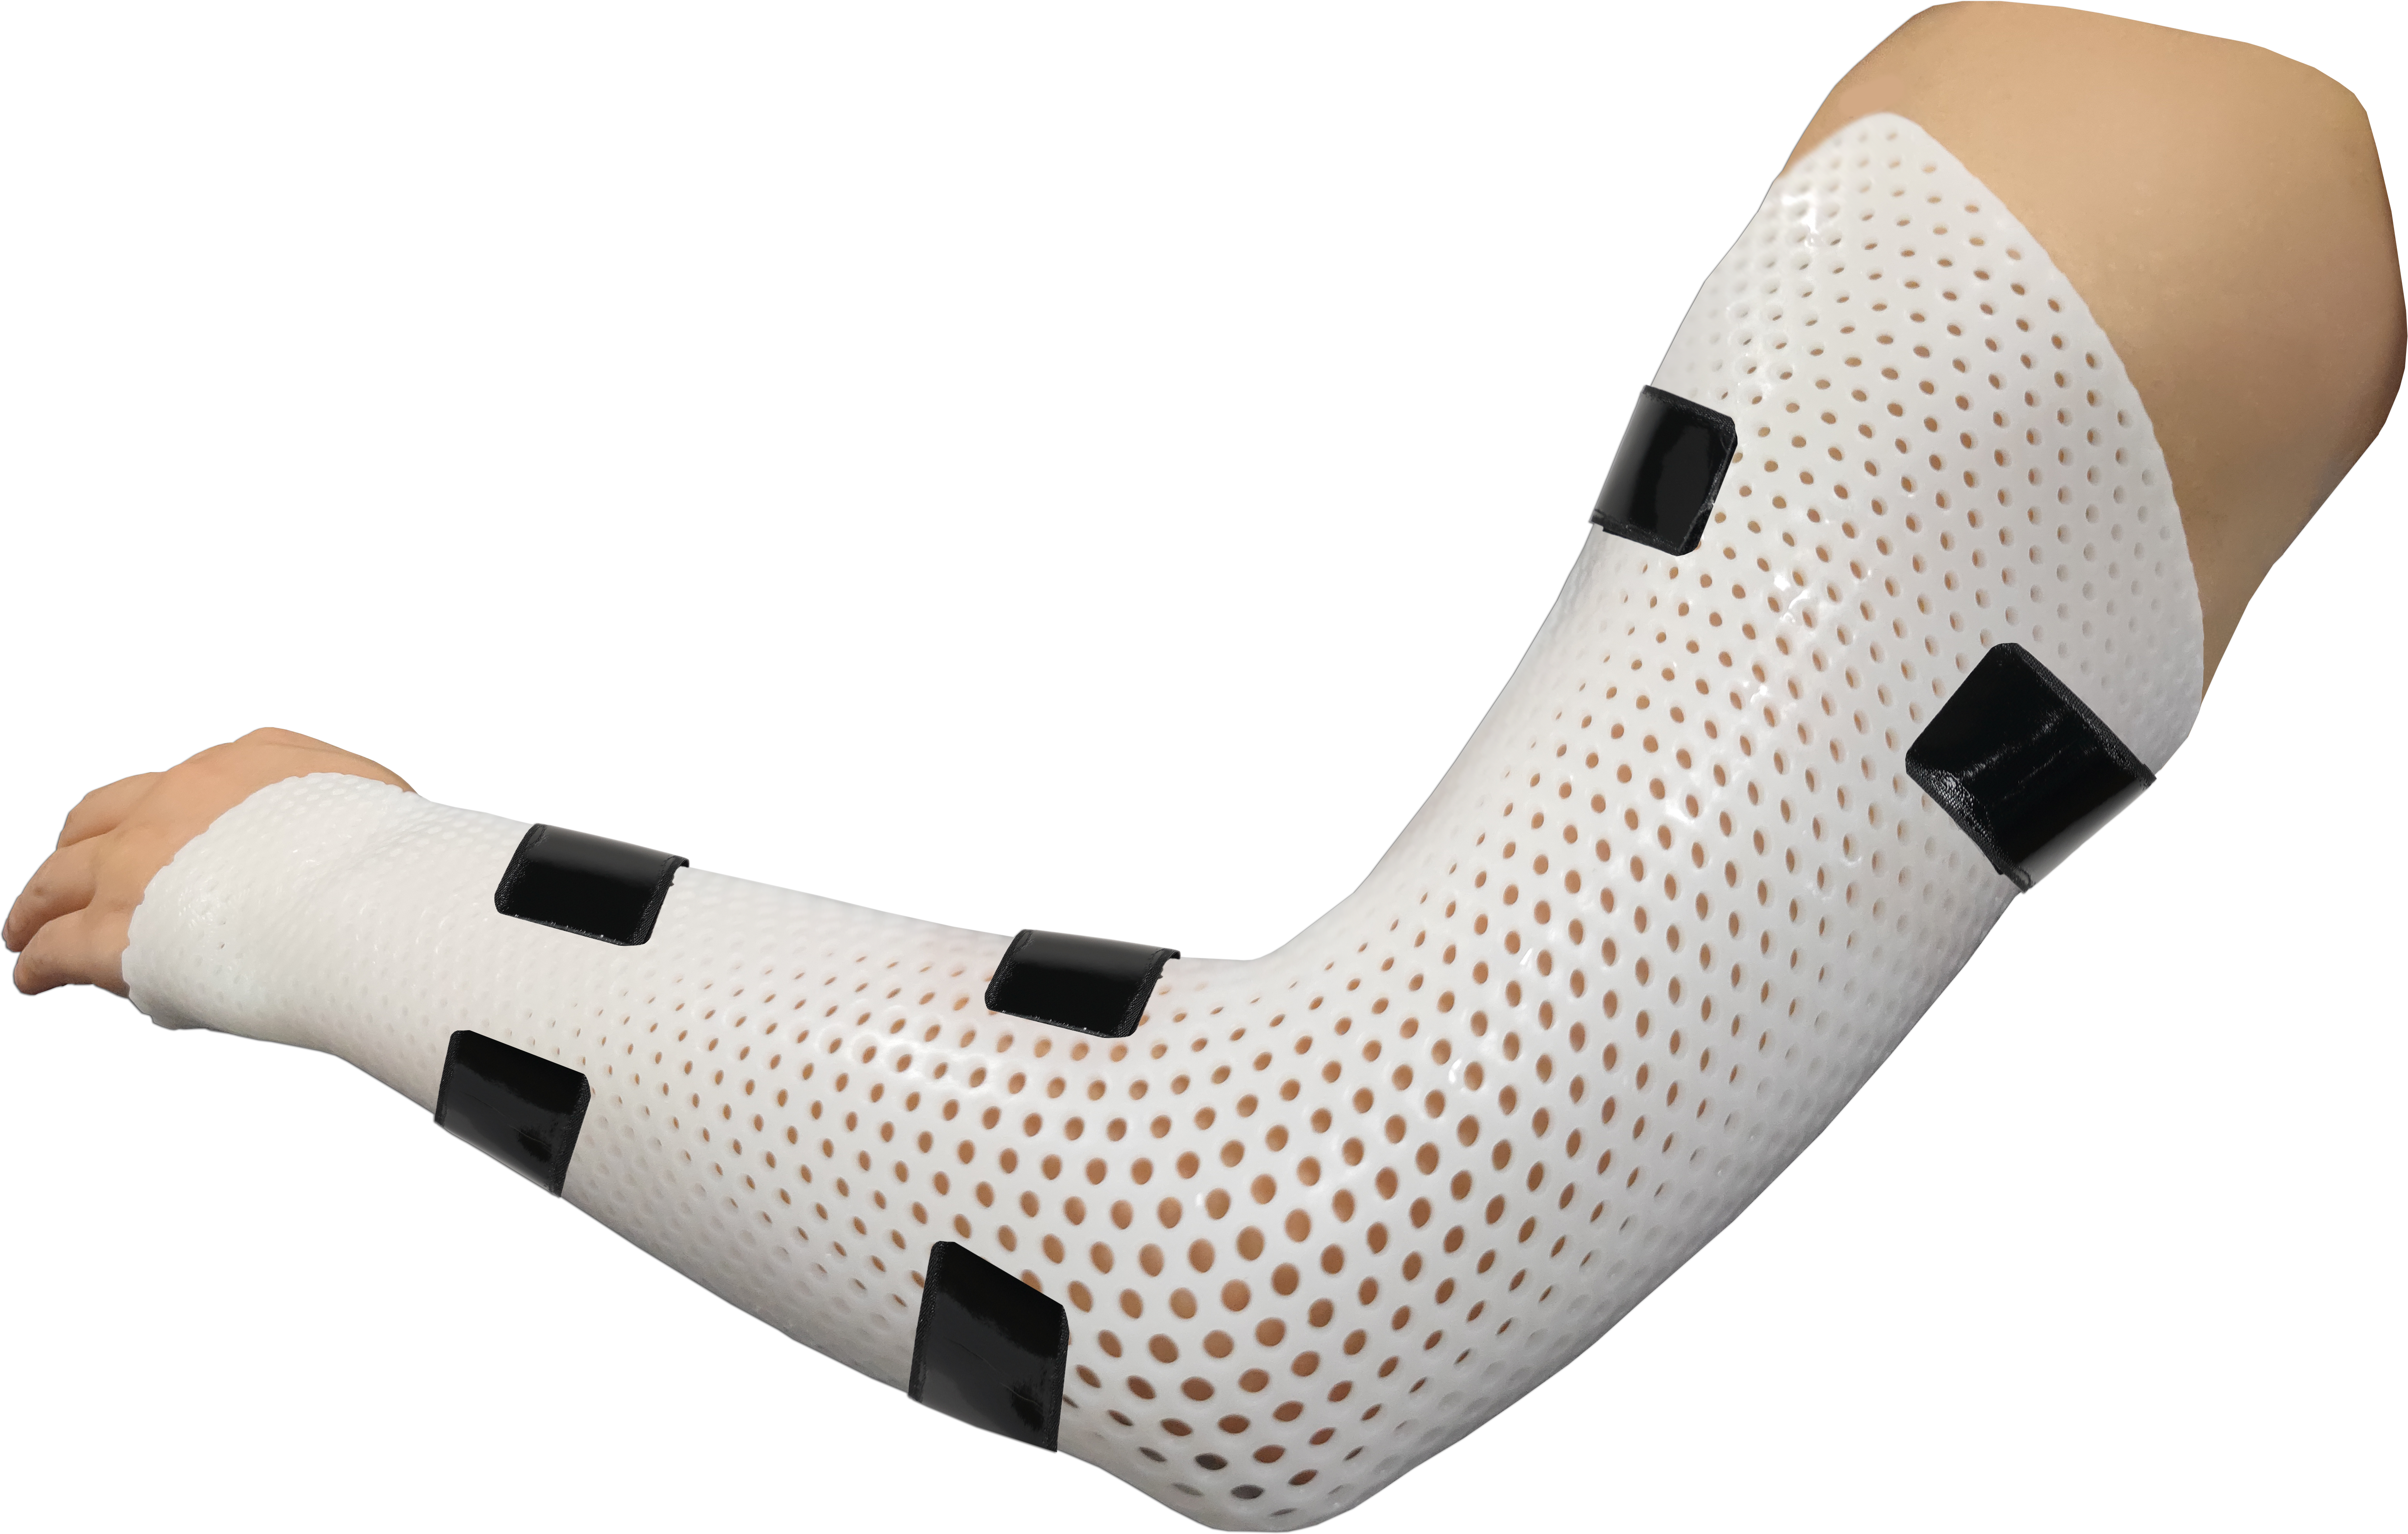 How to make a thermoplastic elbow splint？